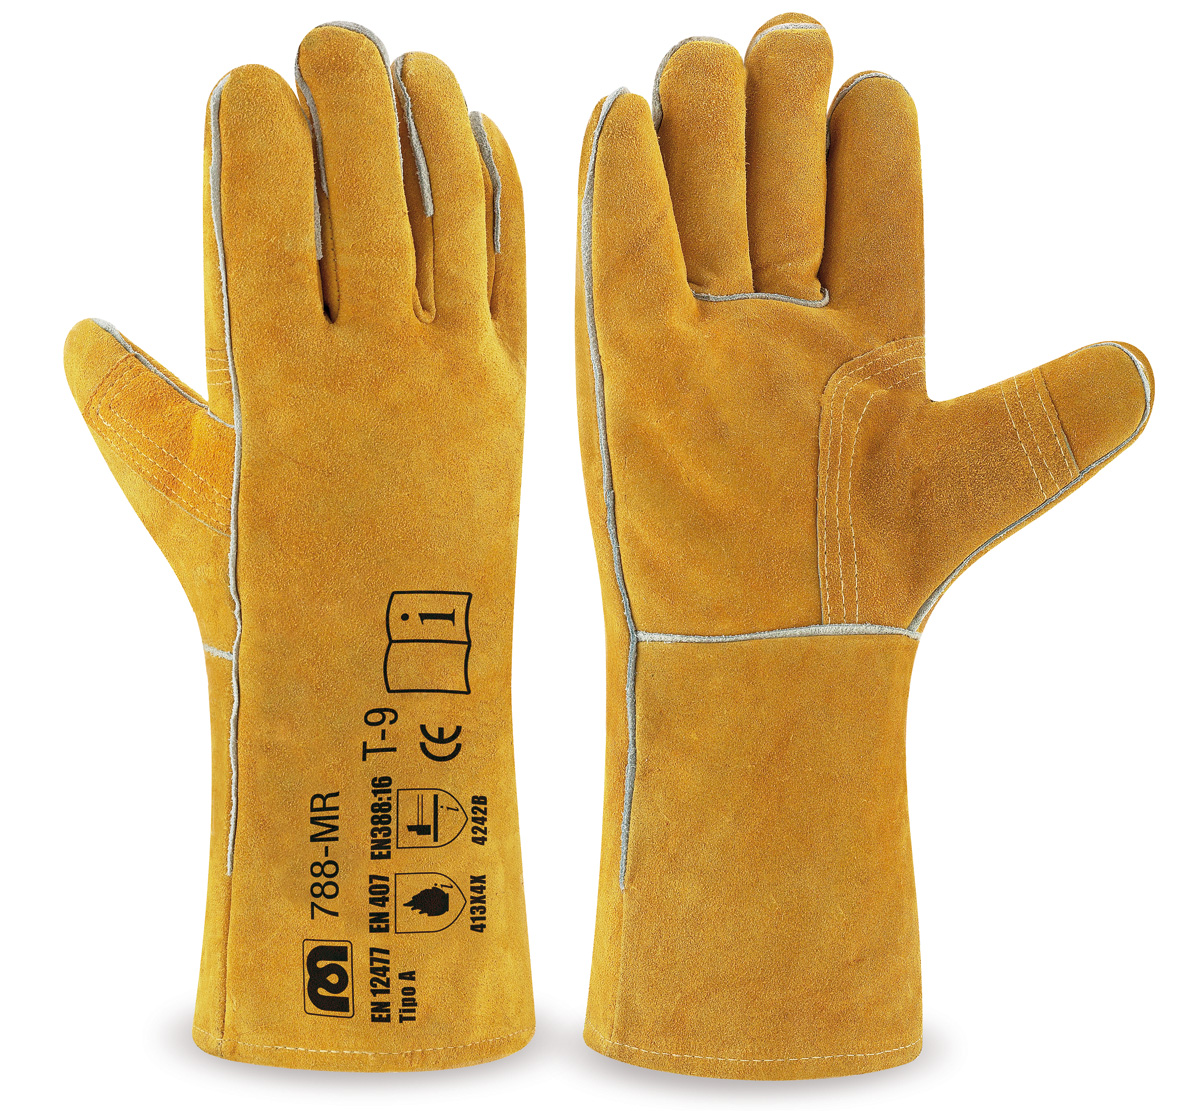 788-MR Work Gloves Welding Premium split leather with Kevlar seams and special lining. Reinforced thumb.